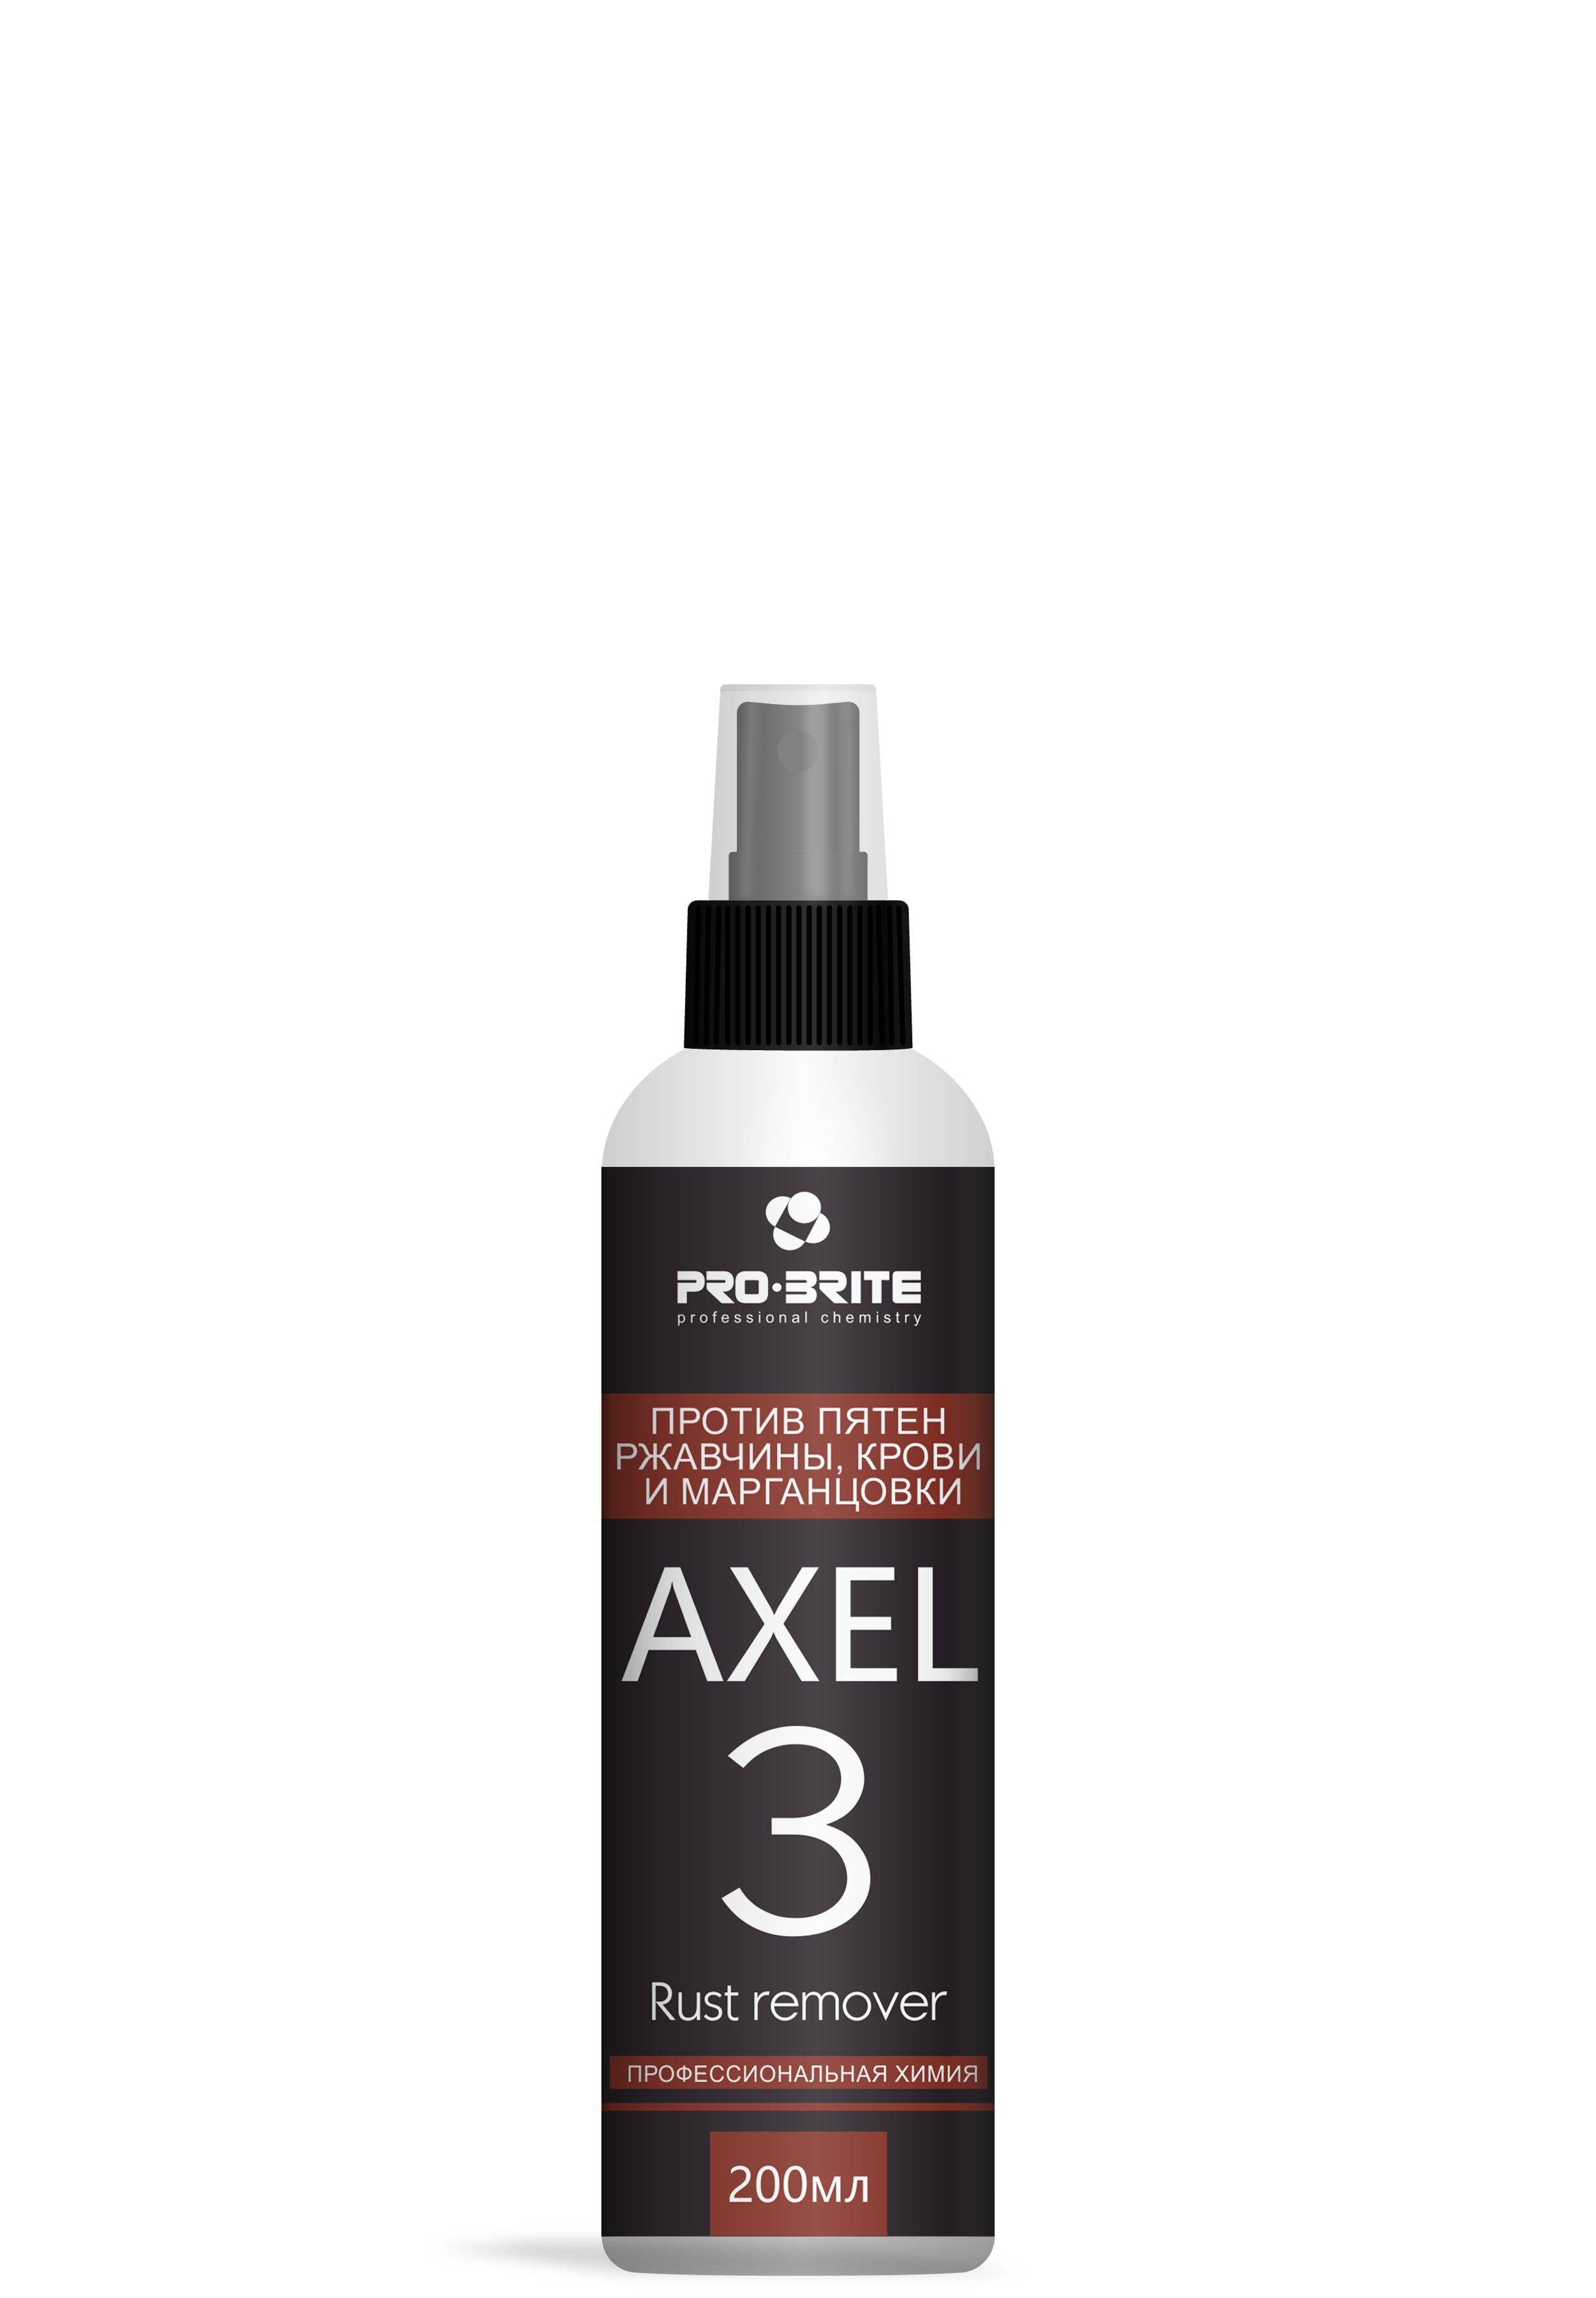 Axel-3 Rust Remover